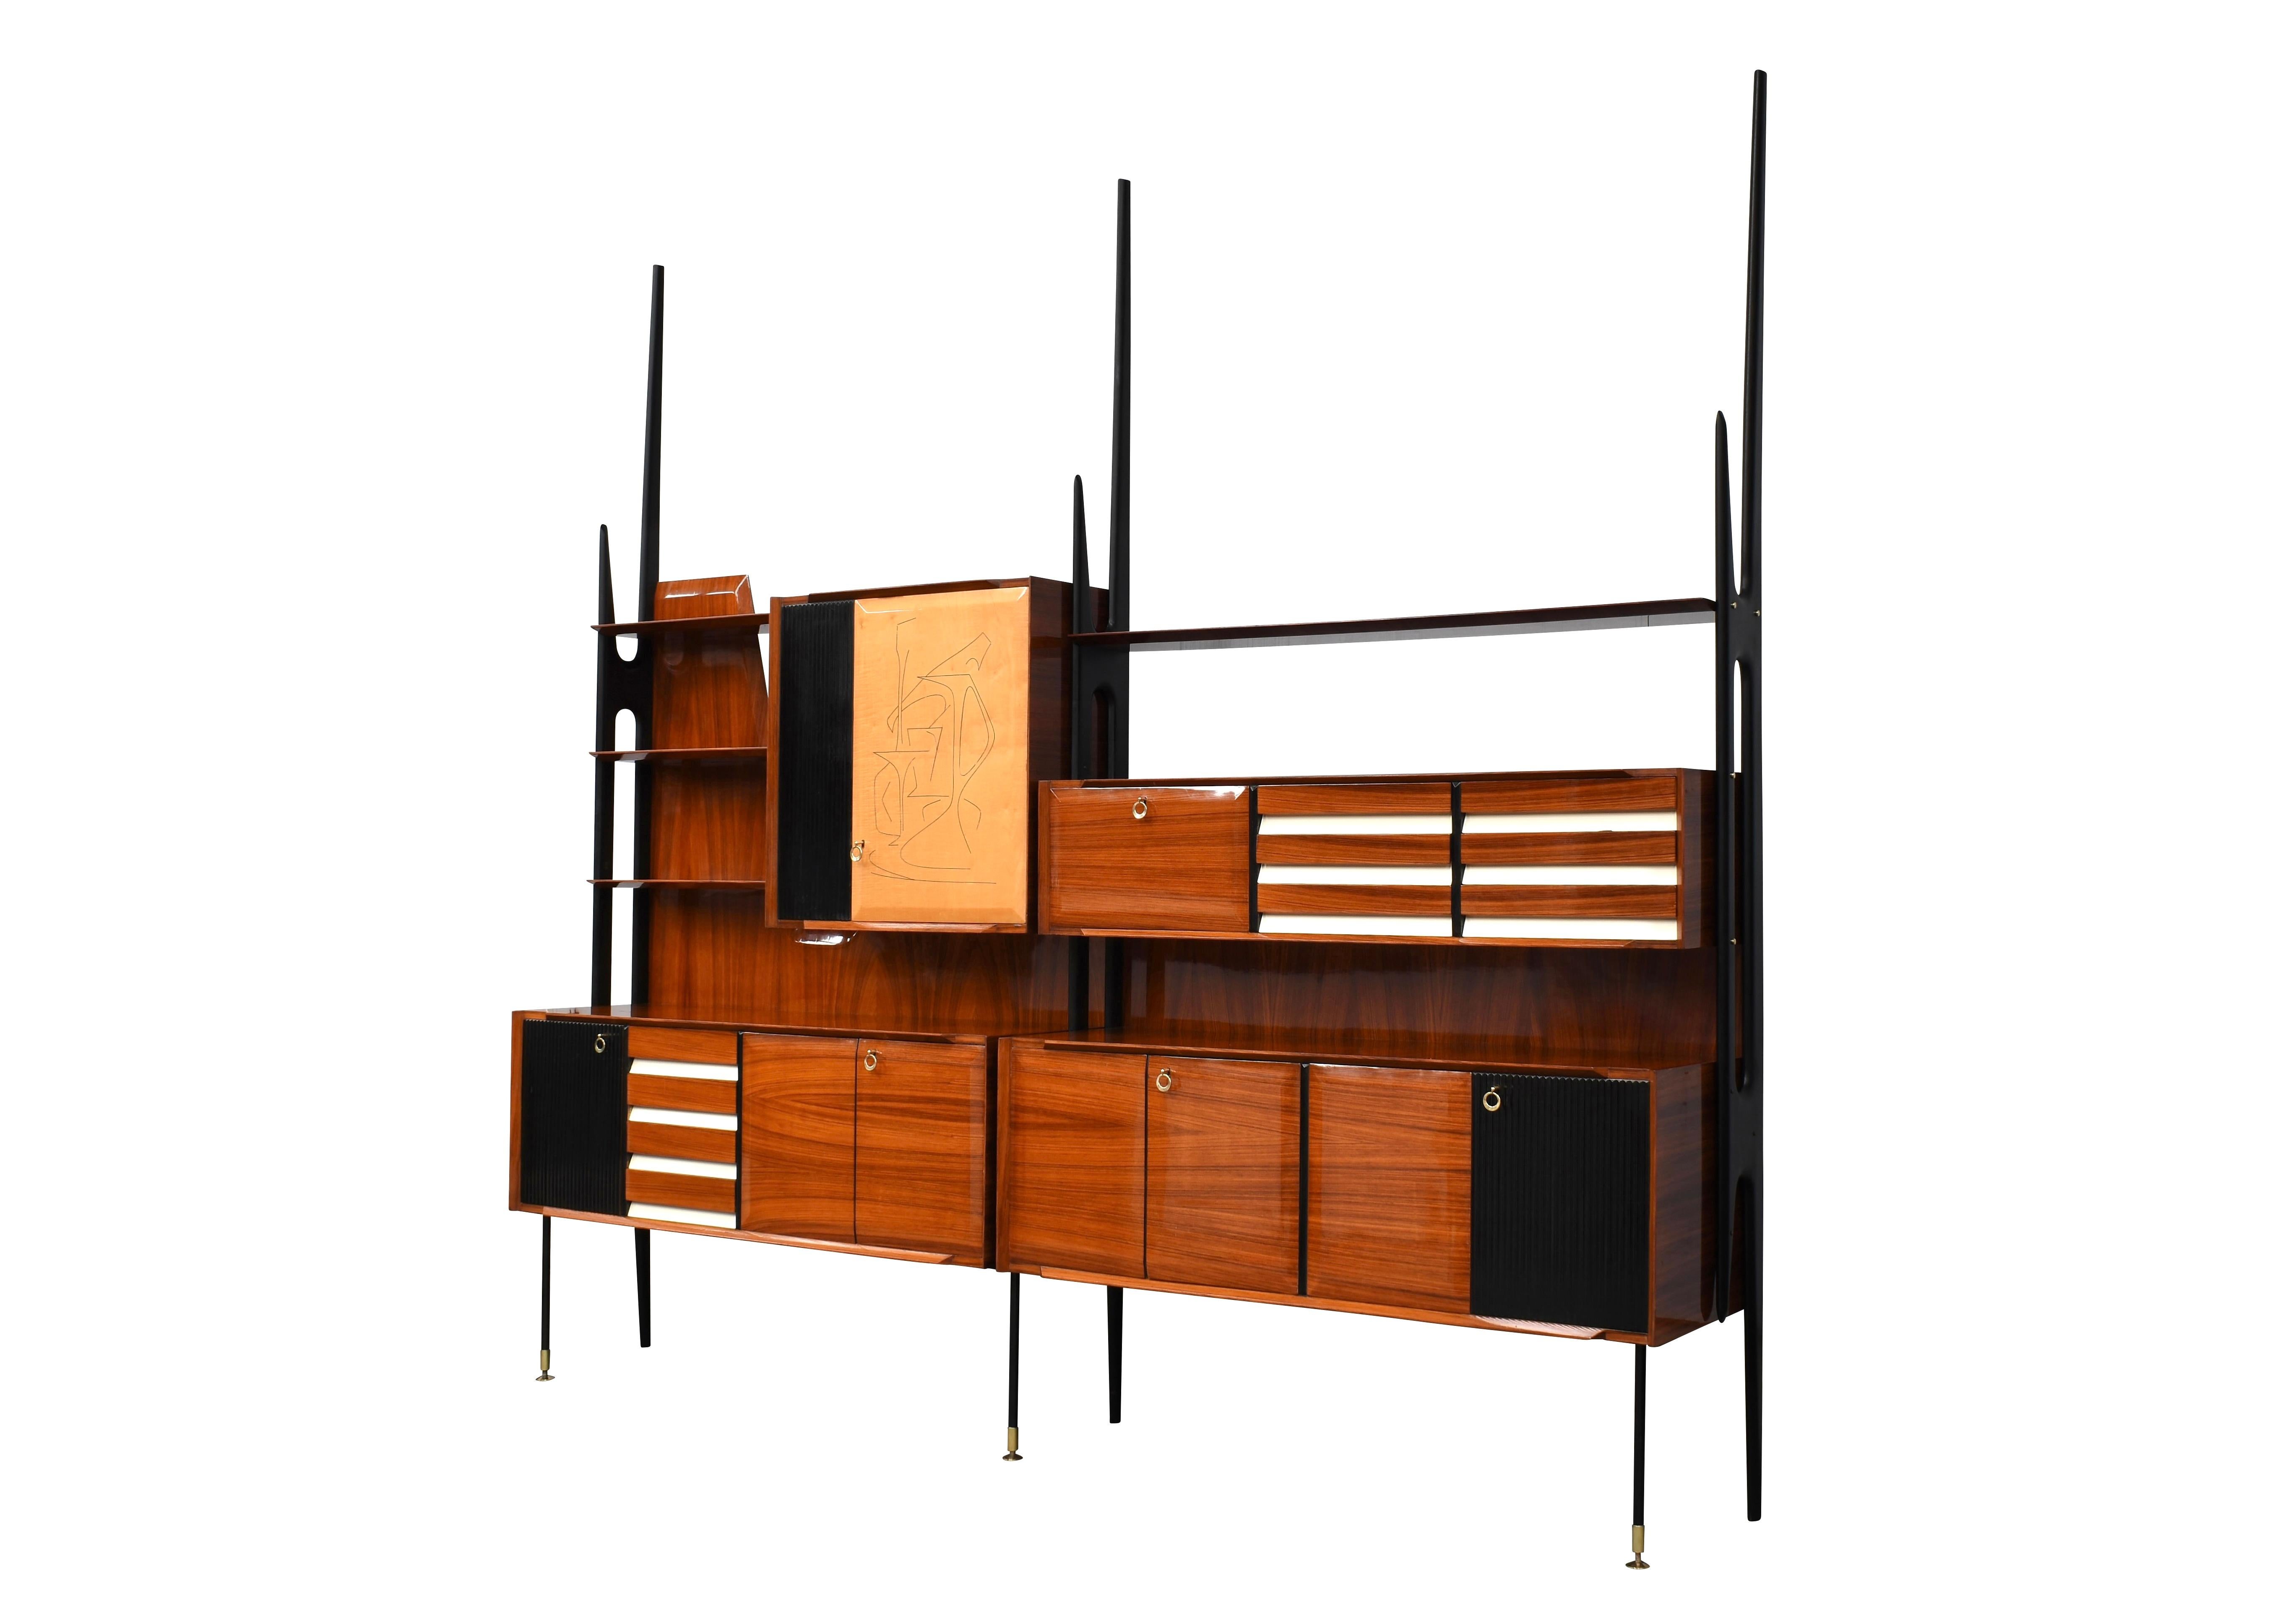 Monumental wall unit by Vittorio Dassi for Mobili Cantù – Italy, circa 1950.
Italian walnut, birch and brass details.
The inside of the cabinets and drawers are covered luxuriously in birch veneer and the shelves are made of birch and some of